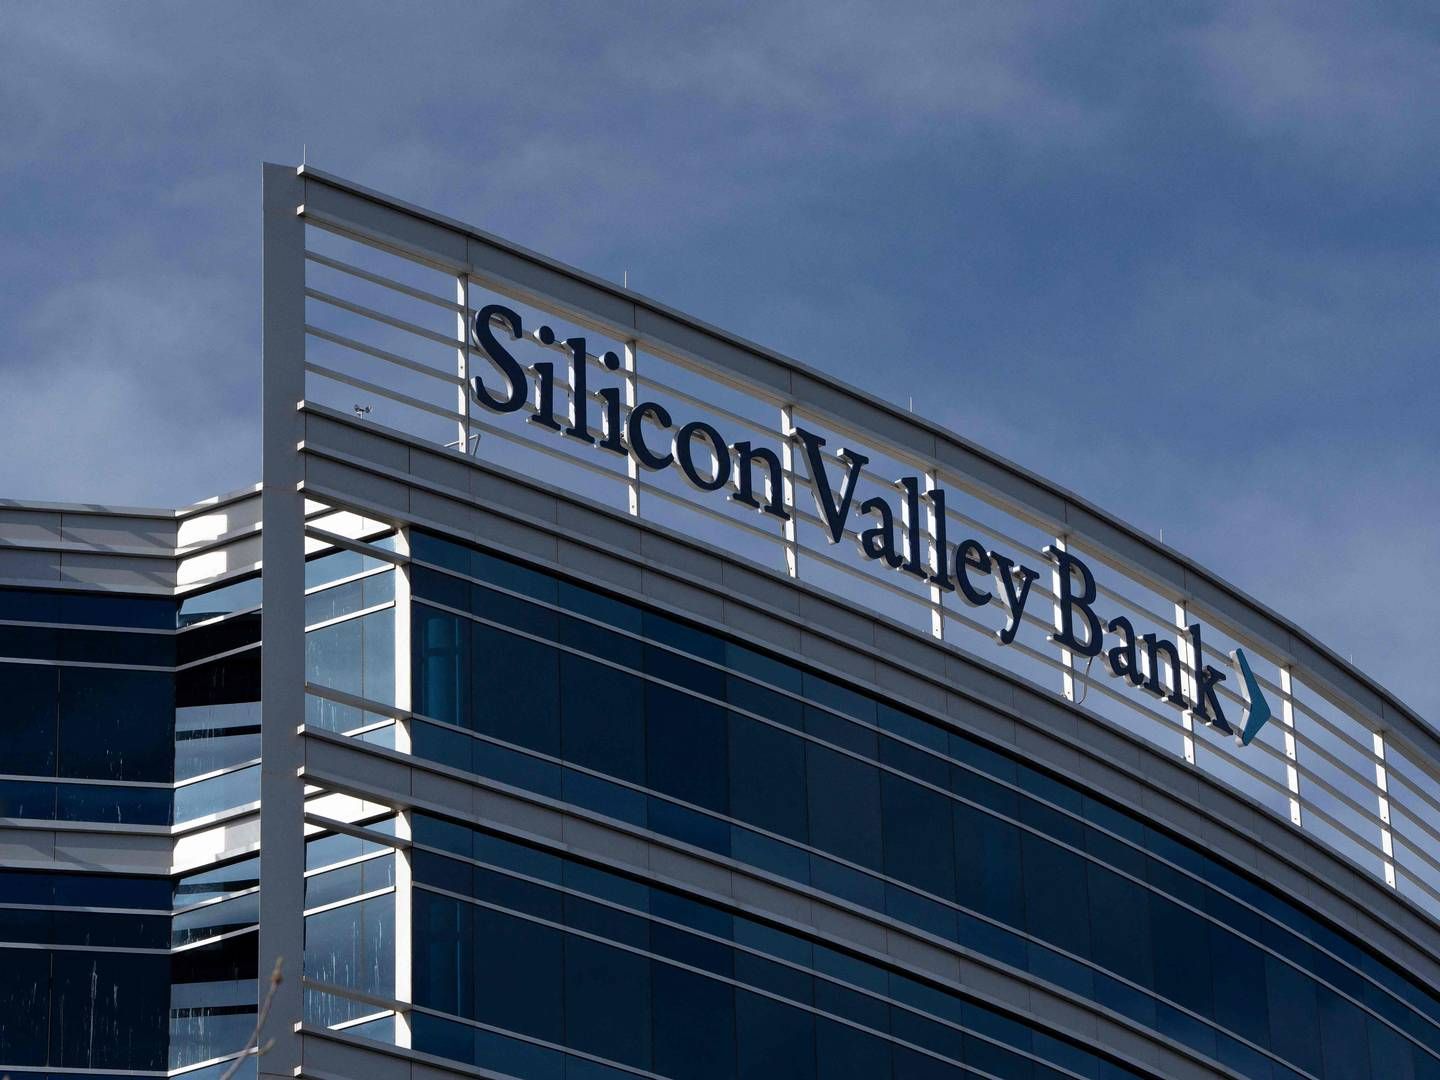 Silicon Valley Bank kollapsede i sidste uge.